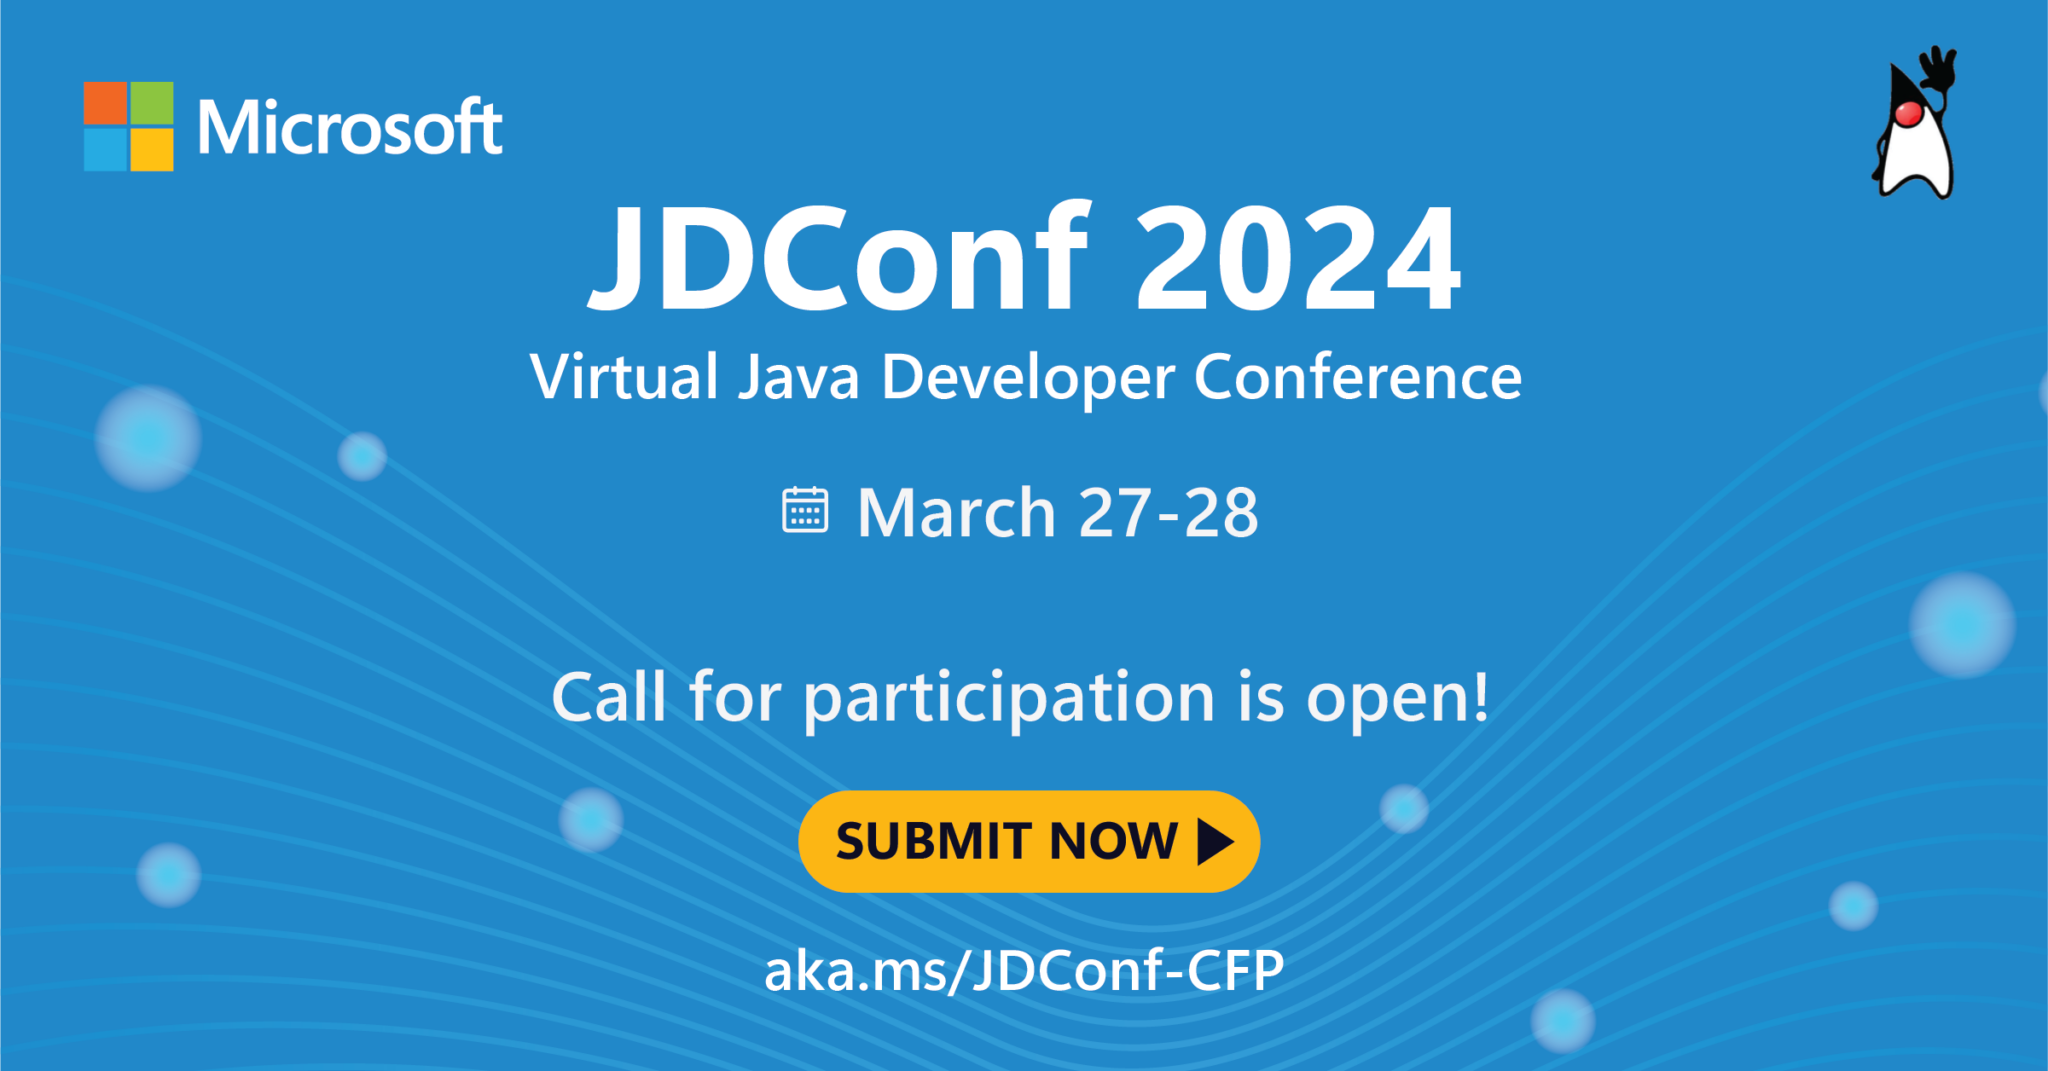 Microsoft JDConf is back in 2024! Microsoft for Java Developers